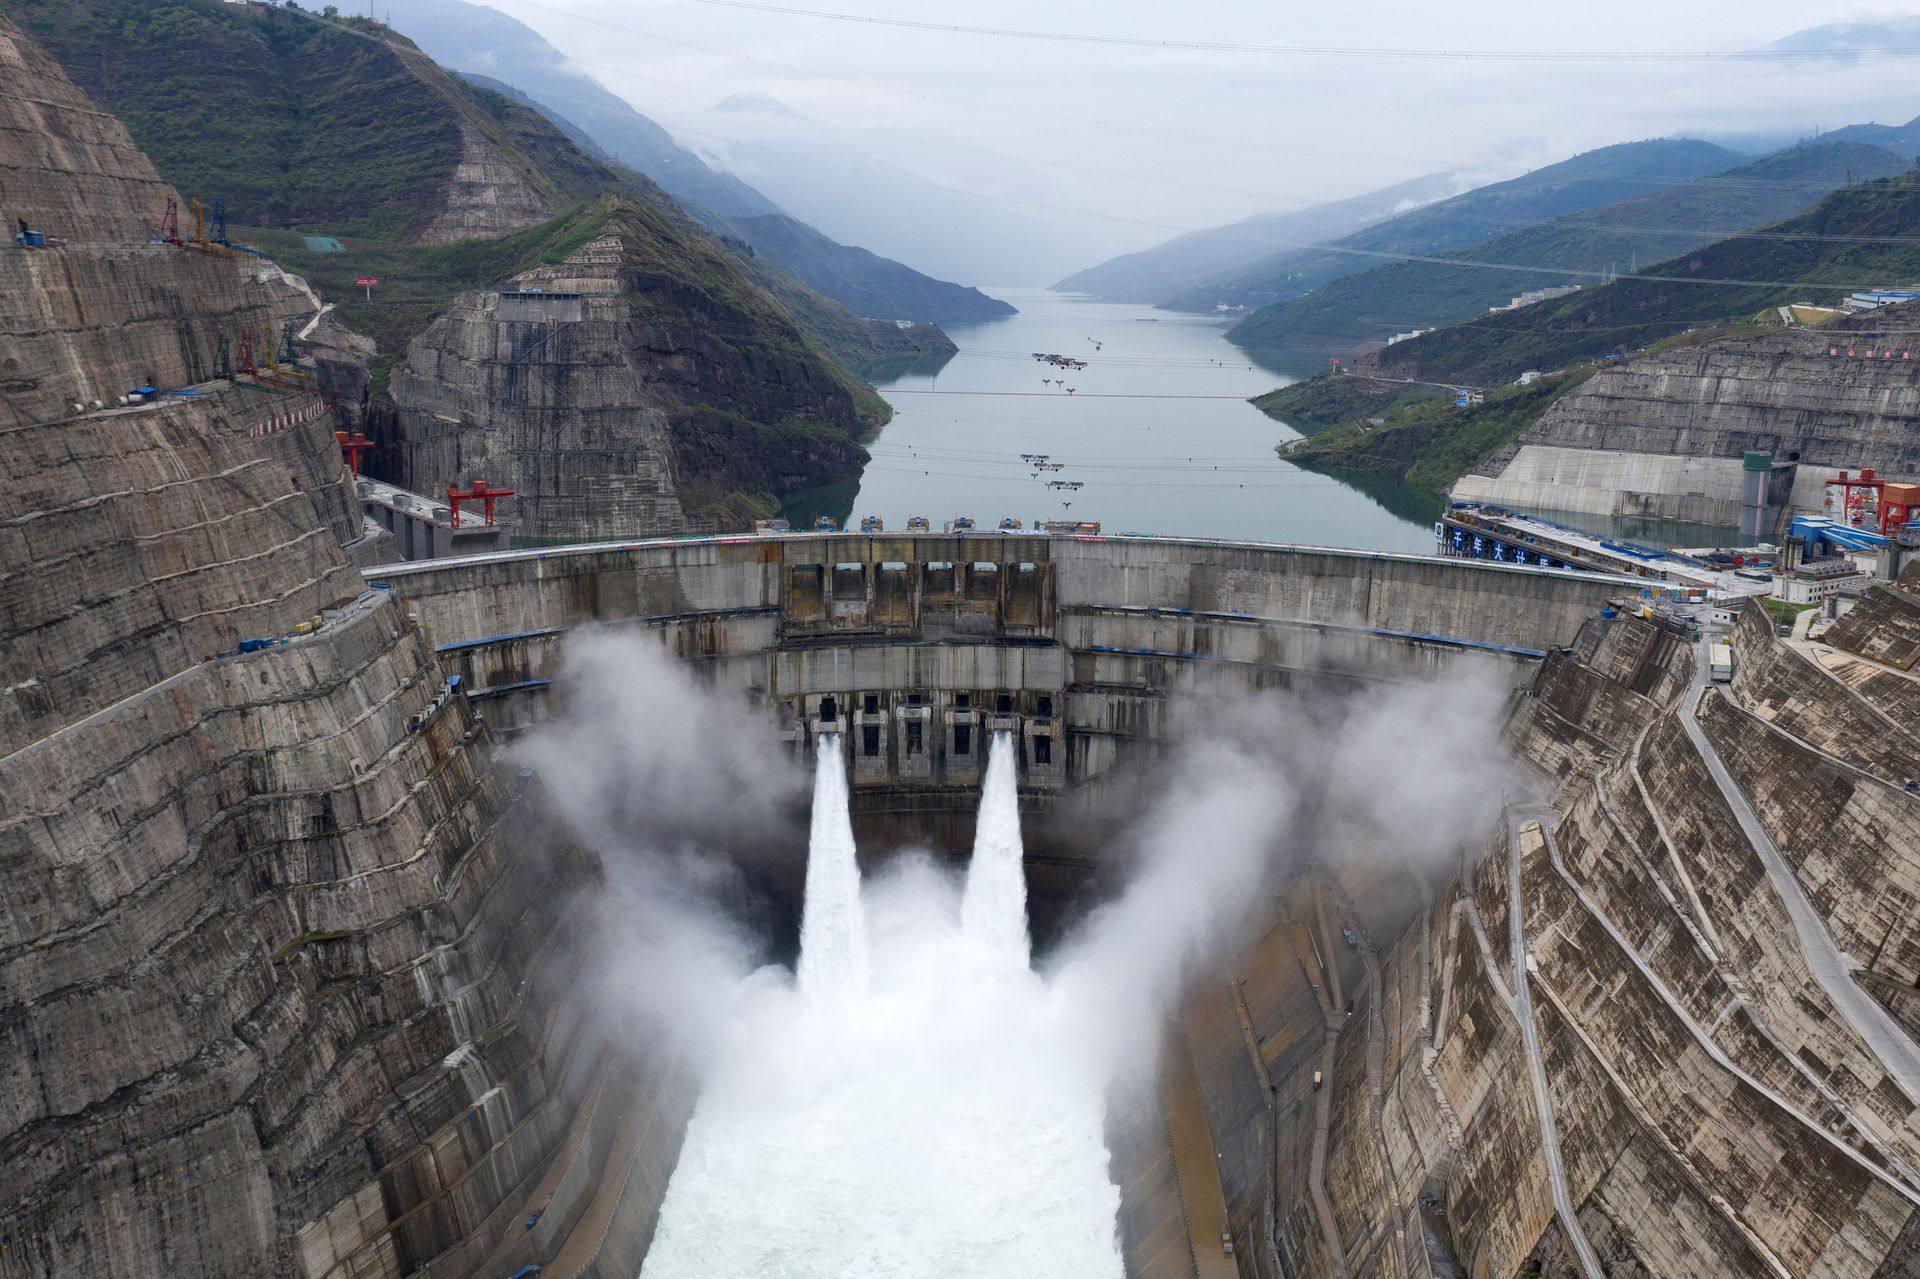 The Baihetan hydropower plant is seen in operation on the border between Qiaojia county of Yunnan province and Ningnan county of Sichuan province in China on June 28, 2021. Photo: Reuters